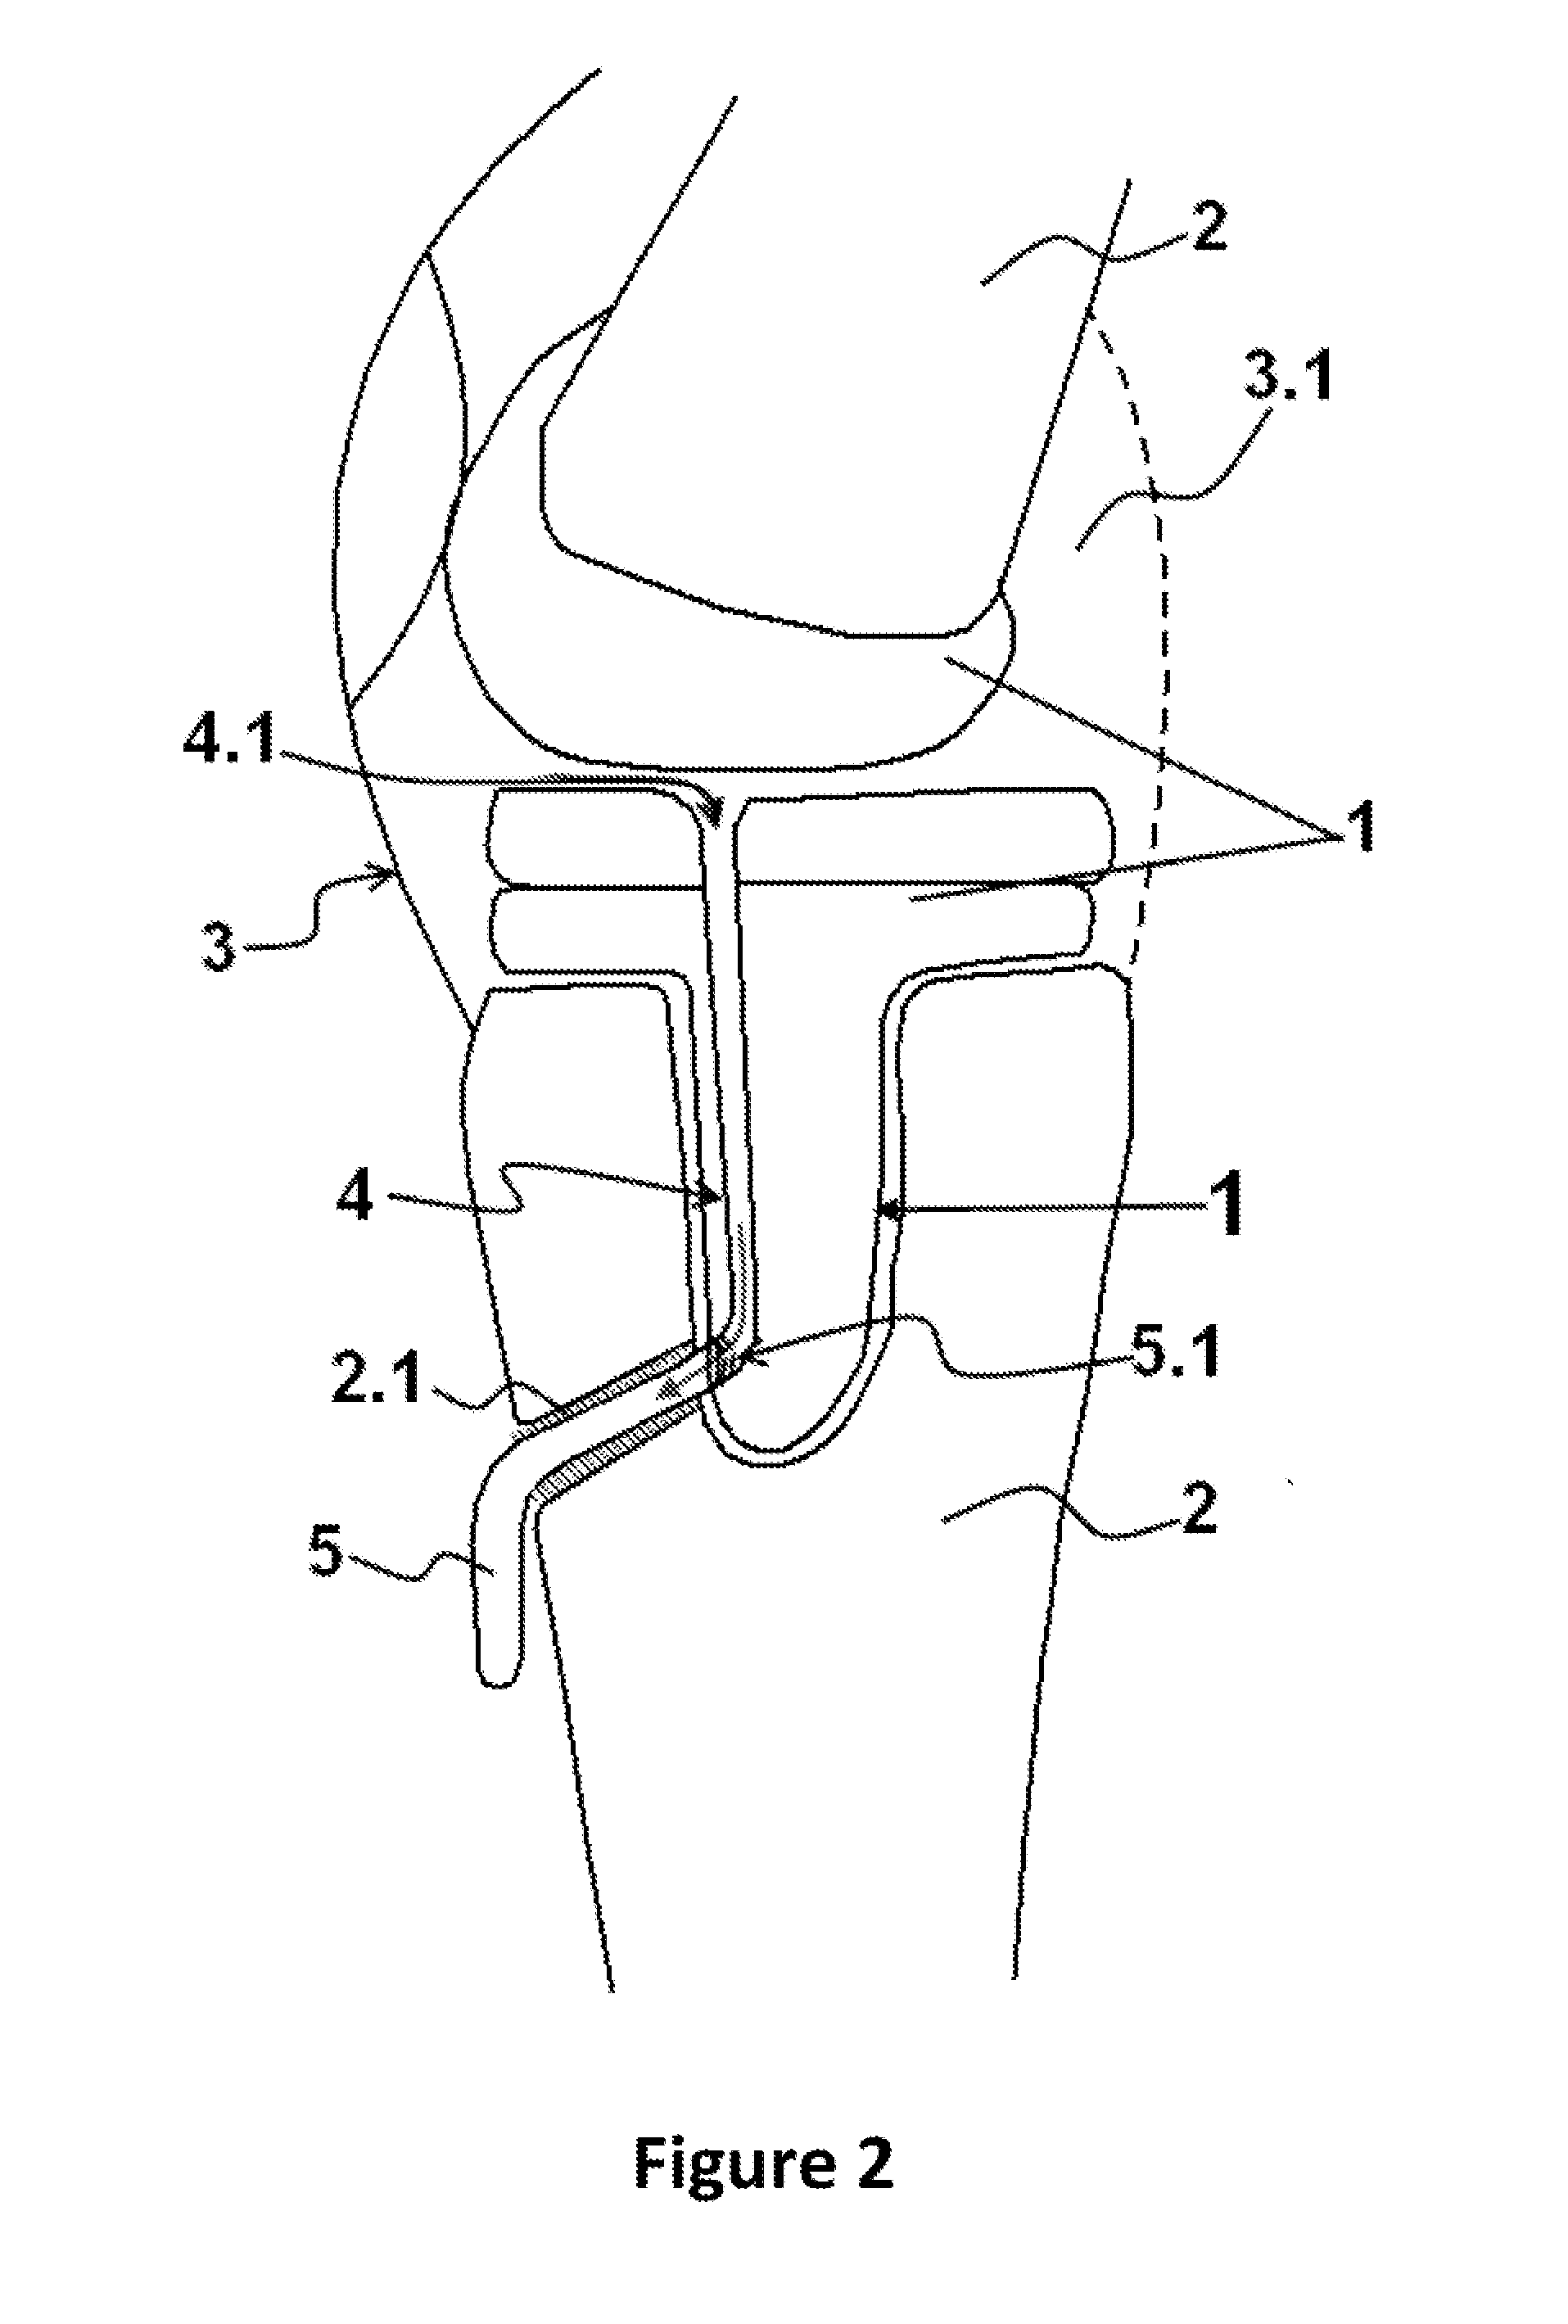 Joint fluid drainage system for the problem of aseptic loosening in the total joint prostheses